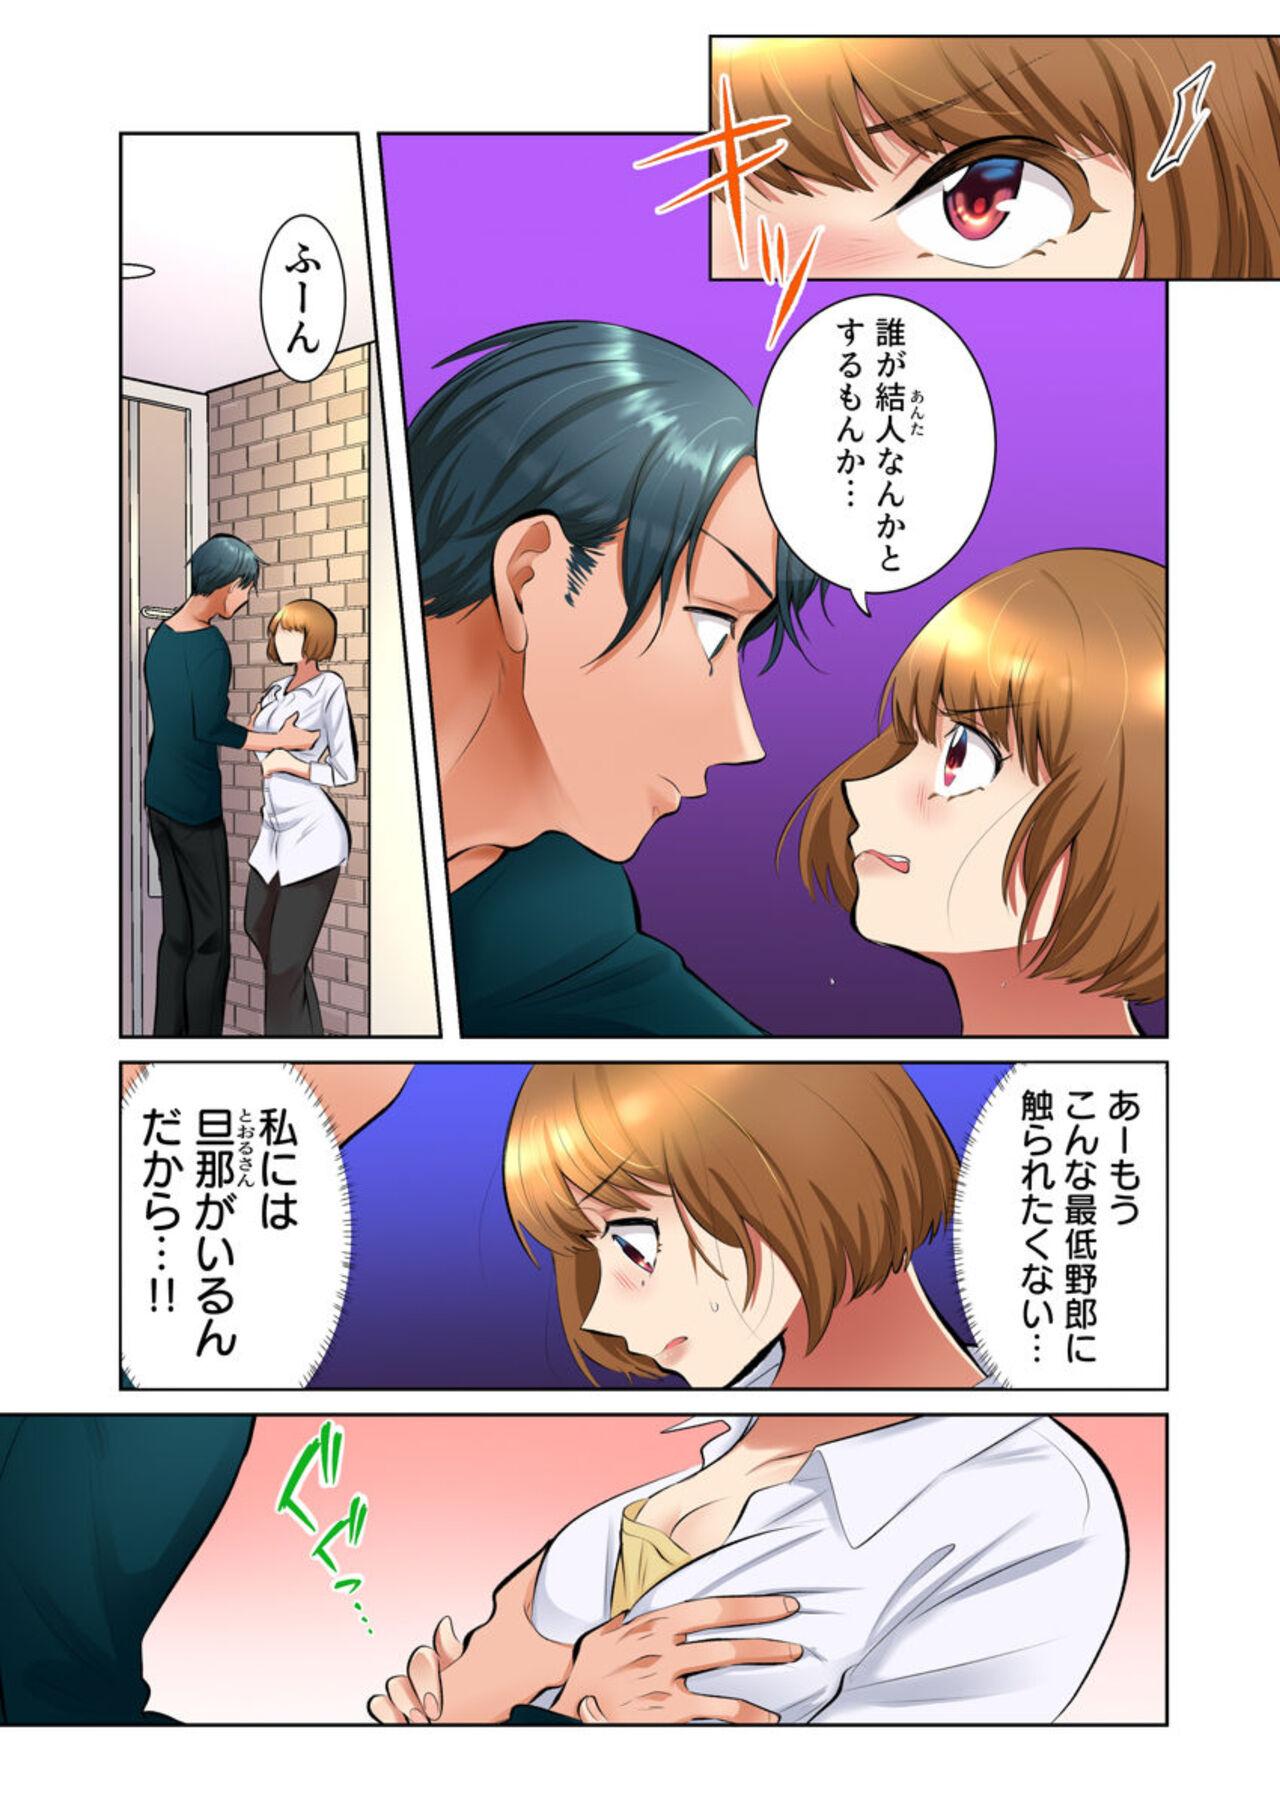 Sensual [Ika Hotaru] My Neighbor Is A Sadistic Ex-Boyfriend ~I Love My Husband, But My Aching Body Has Been Redeveloped~ (Full Color) 2 Face Fucking - Page 3